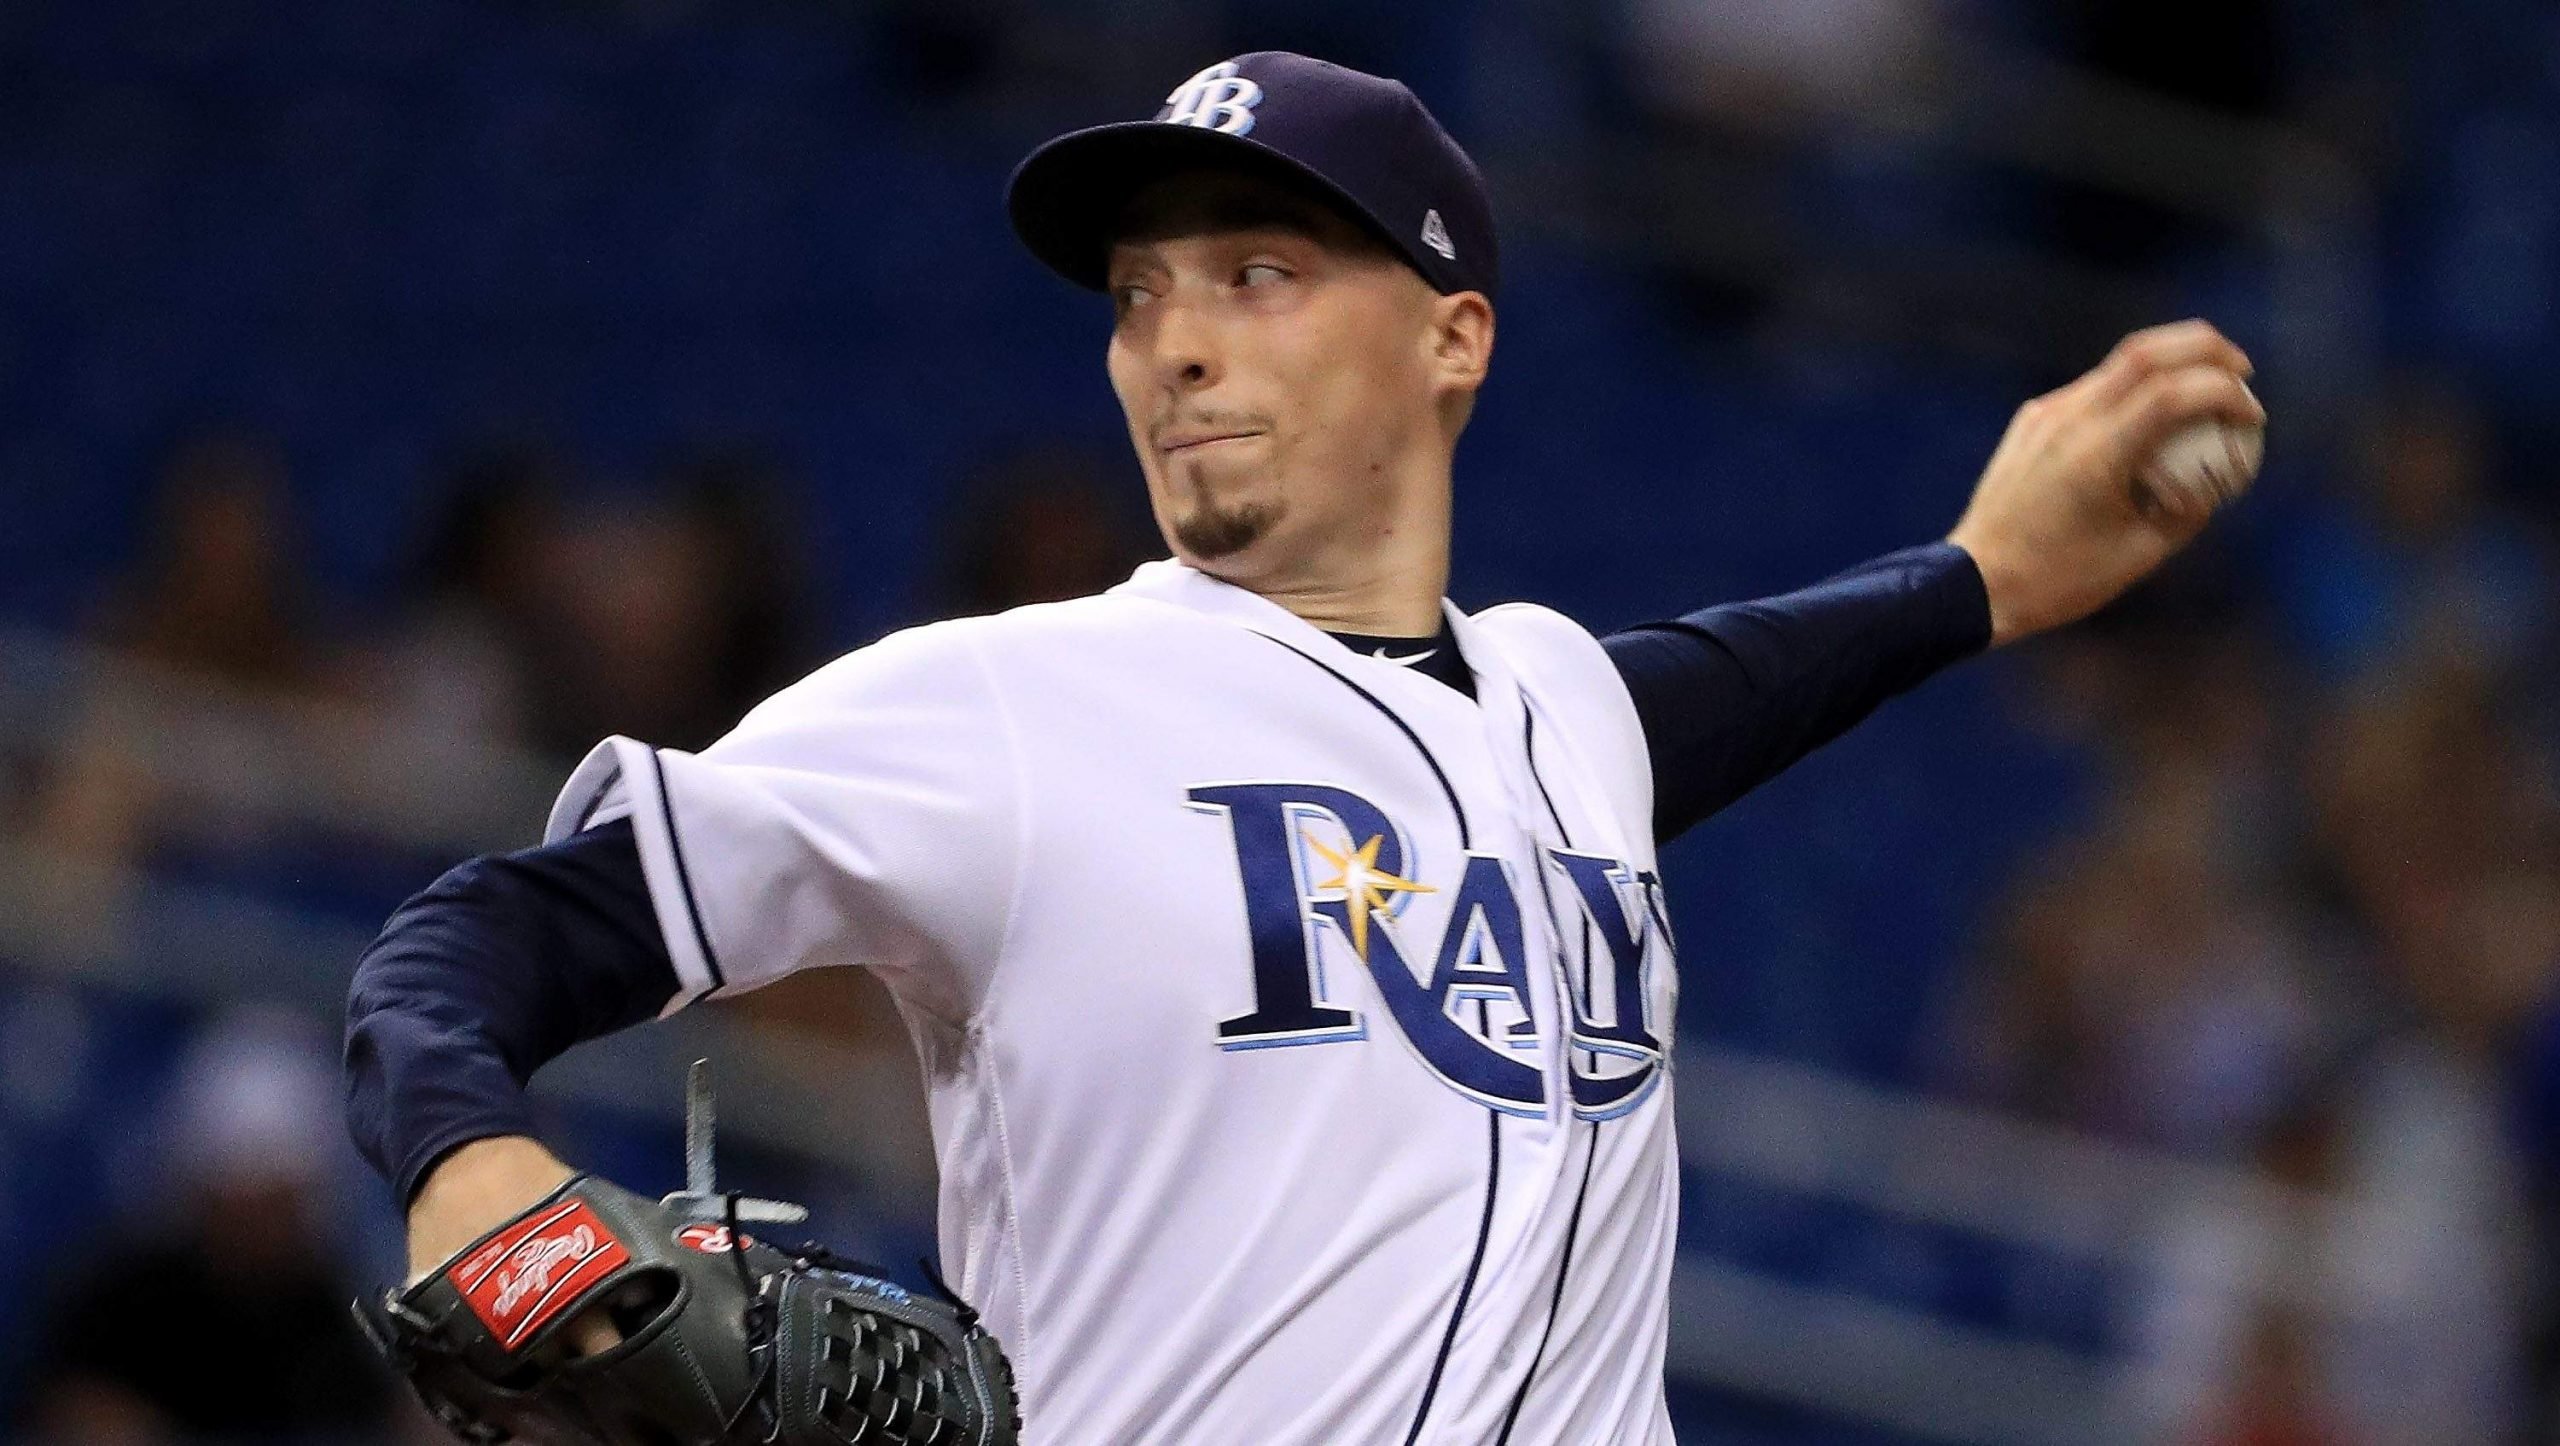 How to Watch Rays Games Online Without Cable 2021